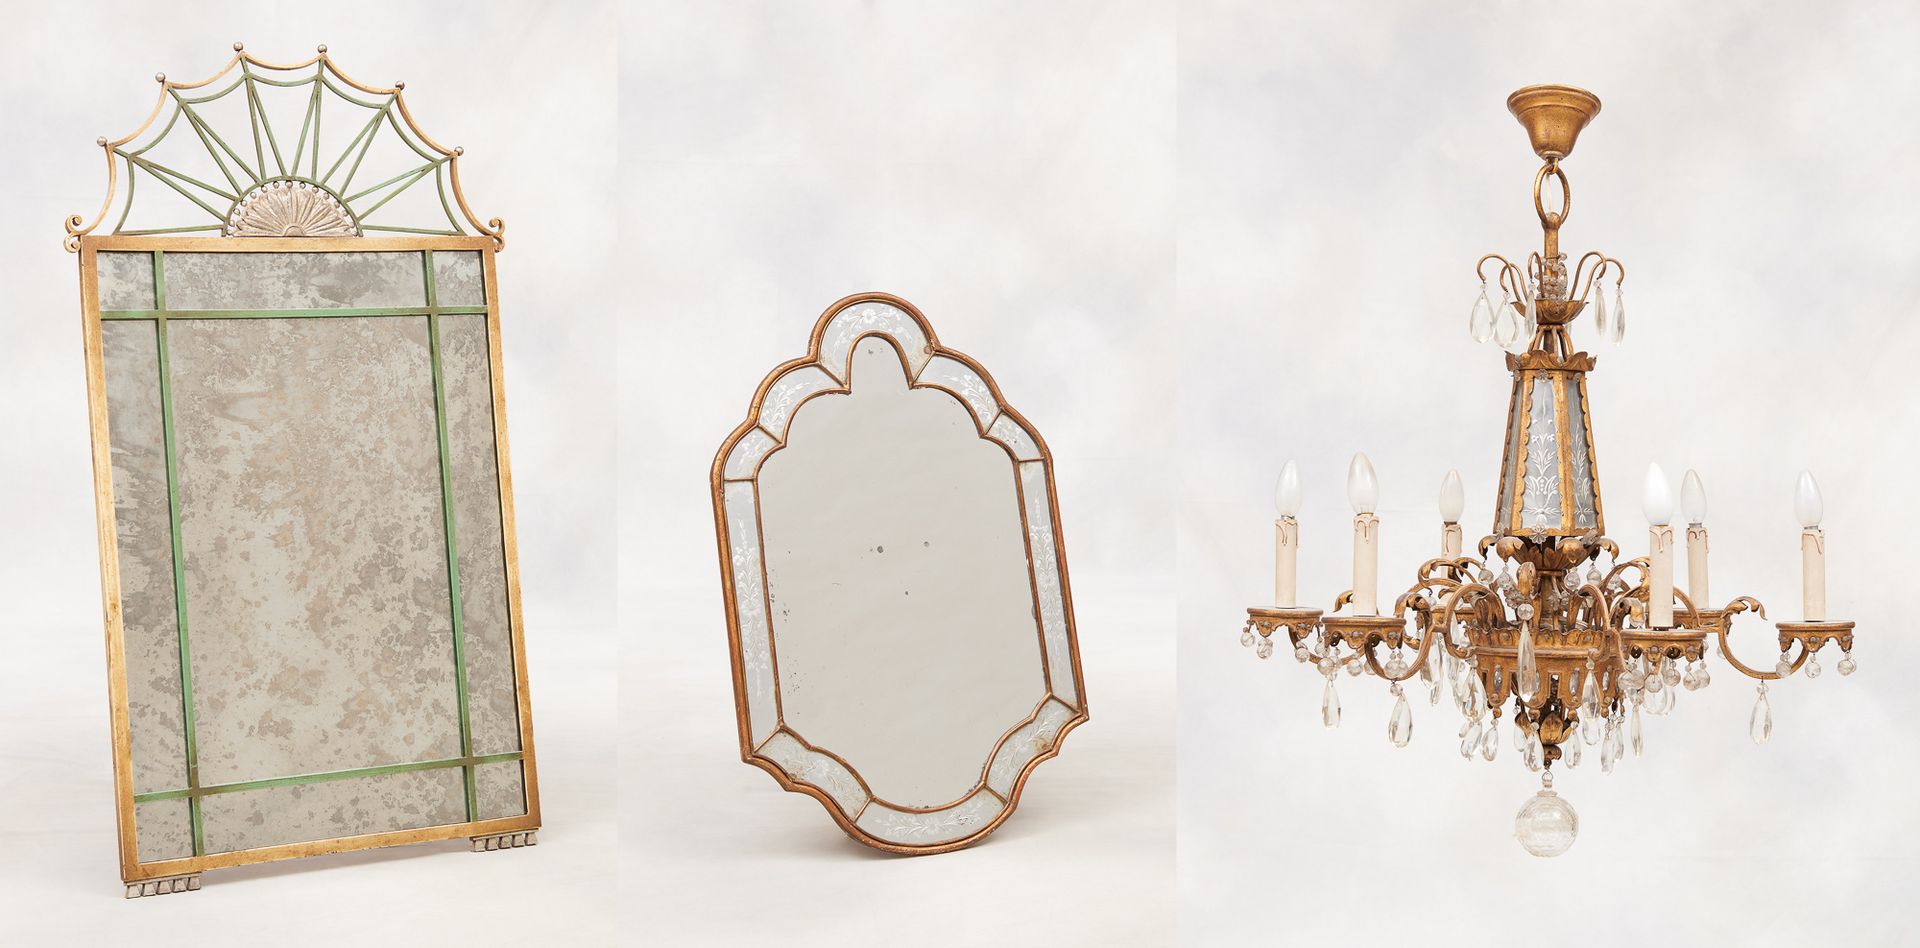 Travail du 19e. Furniture: Lot consisting of a wrought iron mirror and a gilt me&hellip;